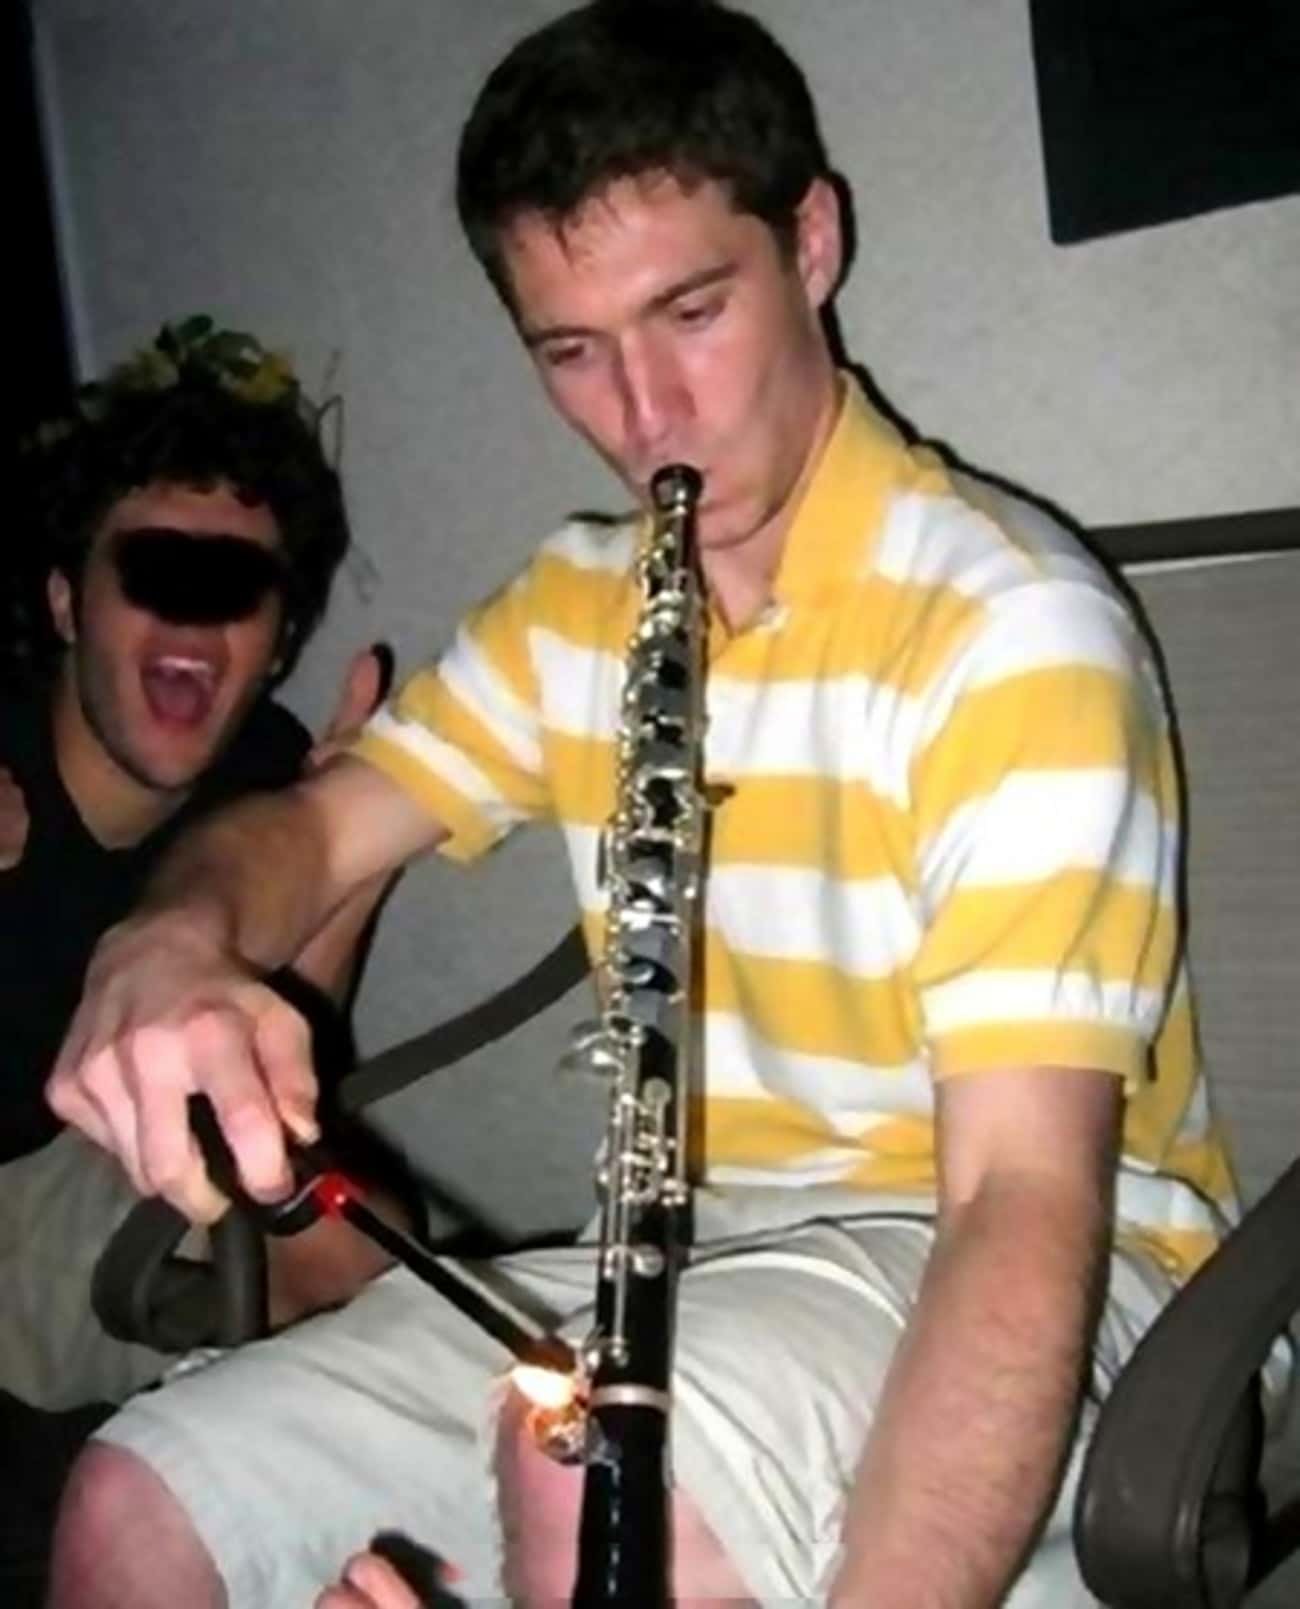 Not Even Smoking Weed Can Make Band Geeks Cool